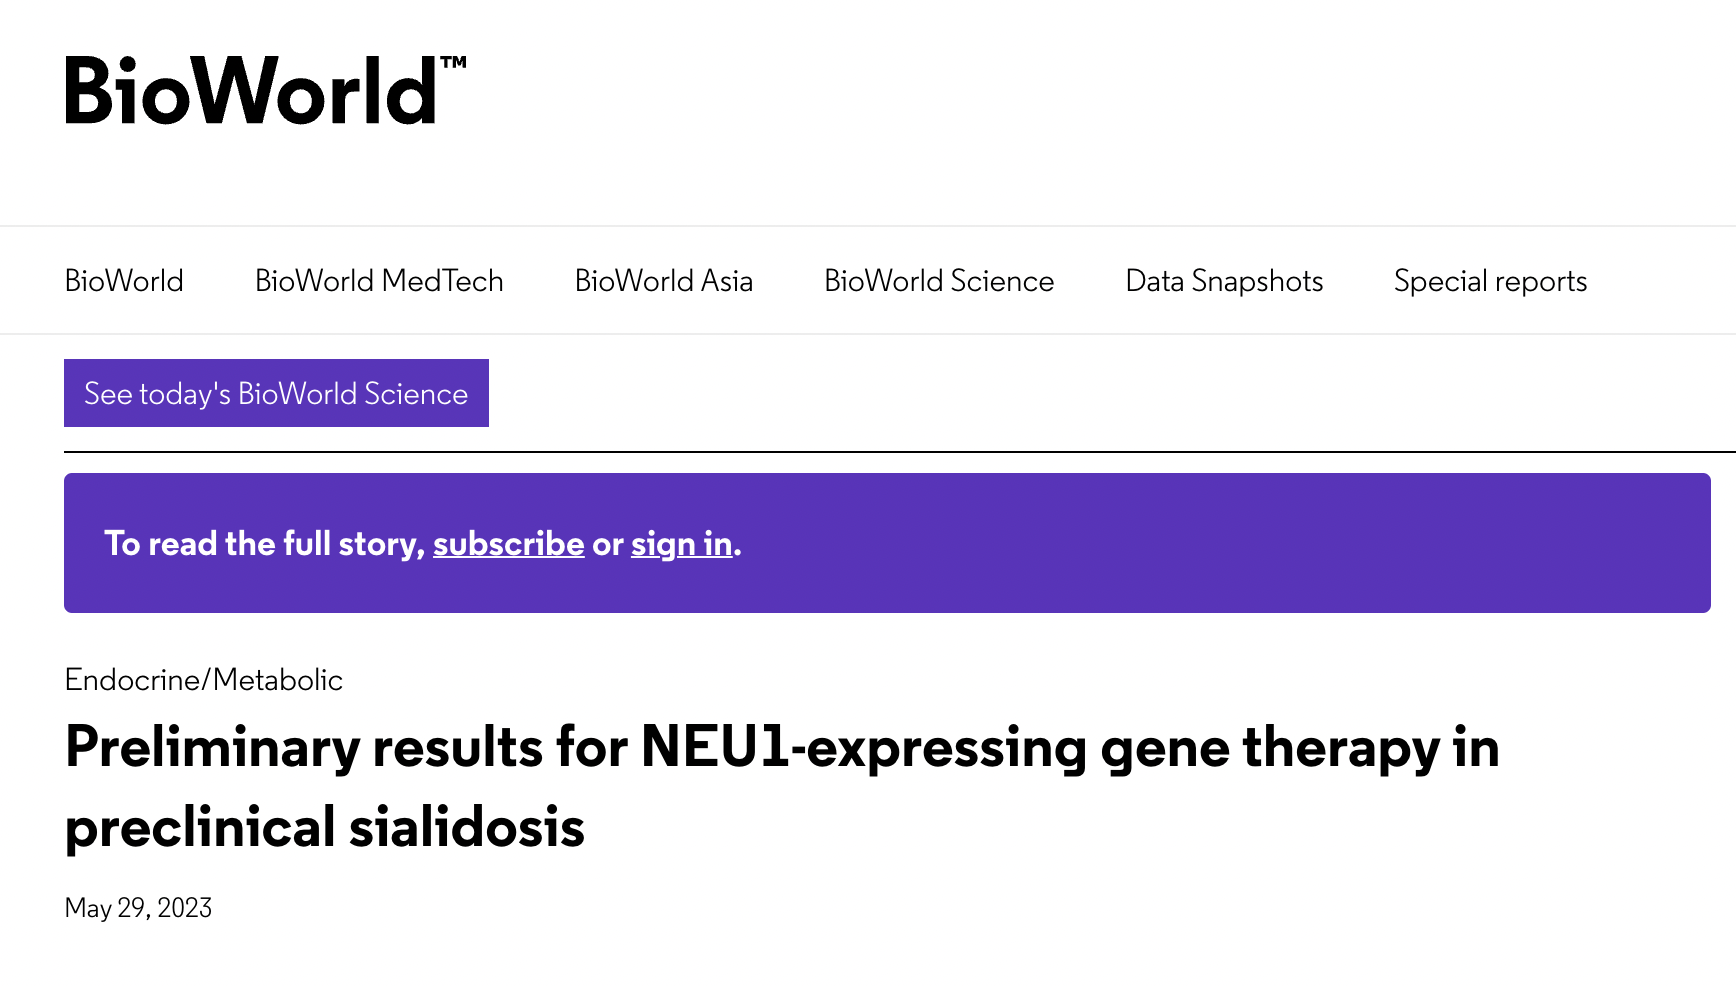 Preliminary results for NEU1-expressing gene therapy in preclinical sialidosis